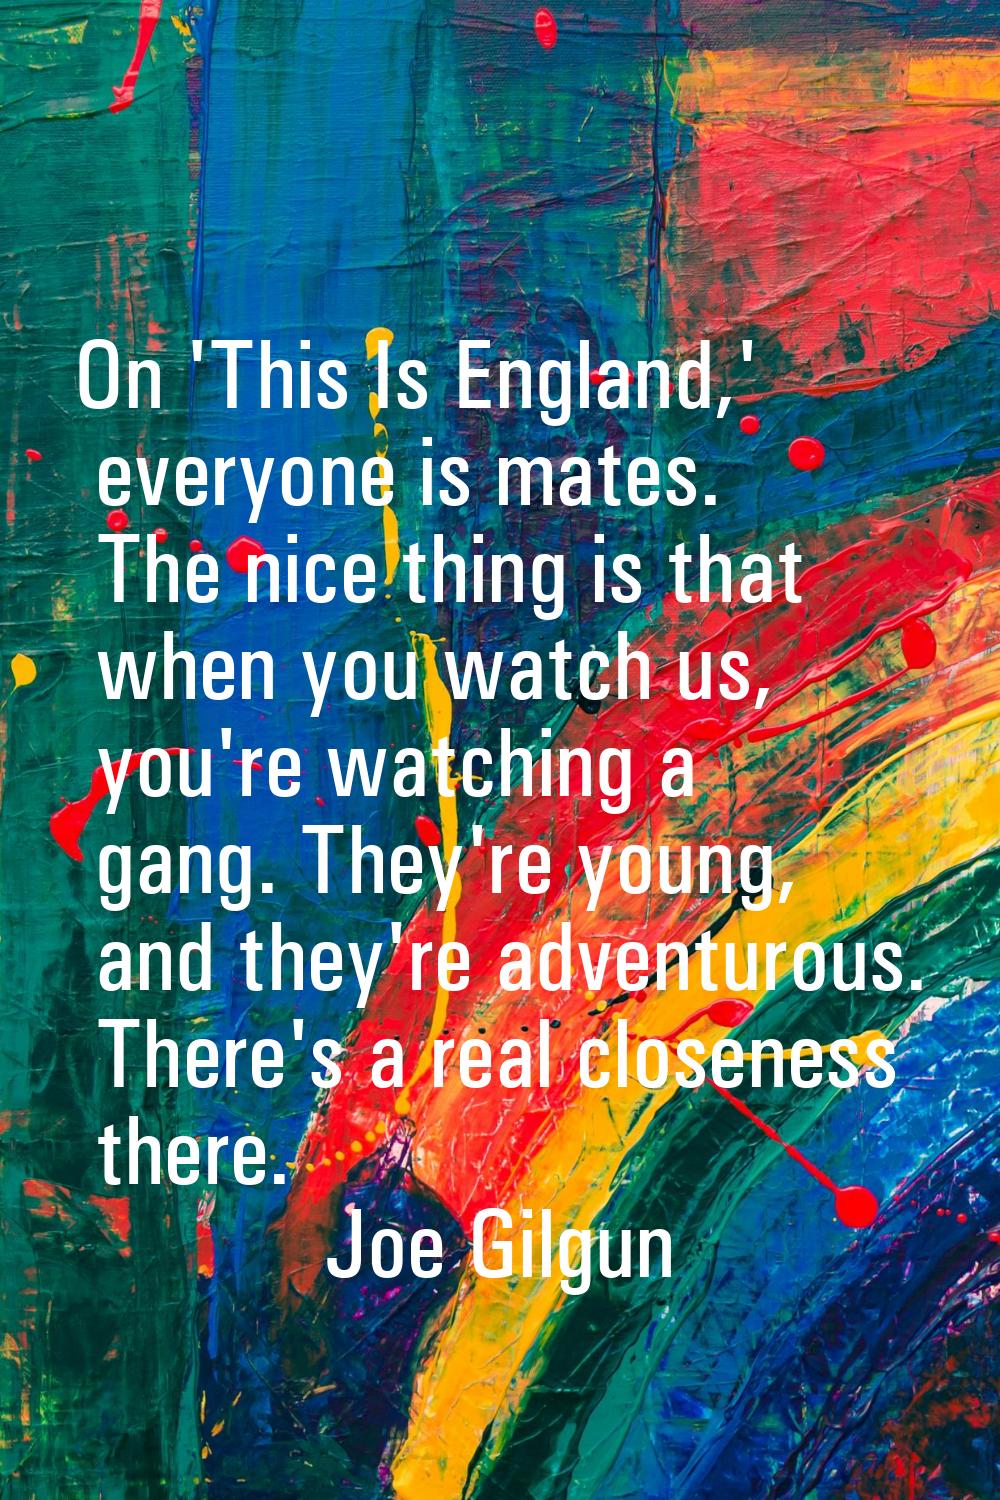 On 'This Is England,' everyone is mates. The nice thing is that when you watch us, you're watching 